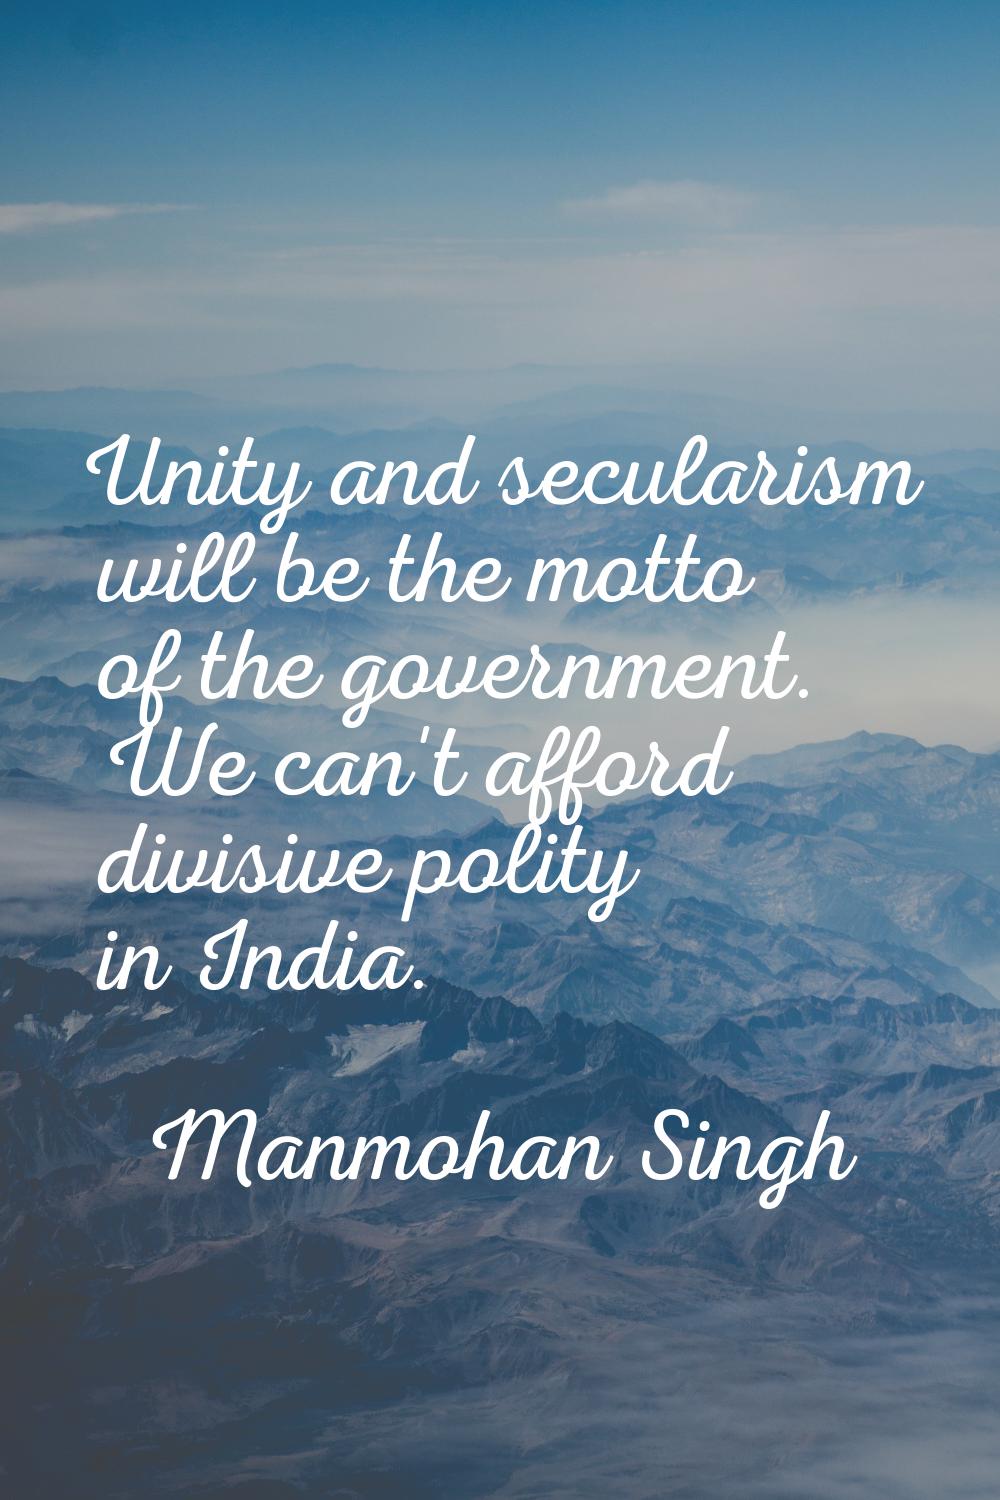 Unity and secularism will be the motto of the government. We can't afford divisive polity in India.